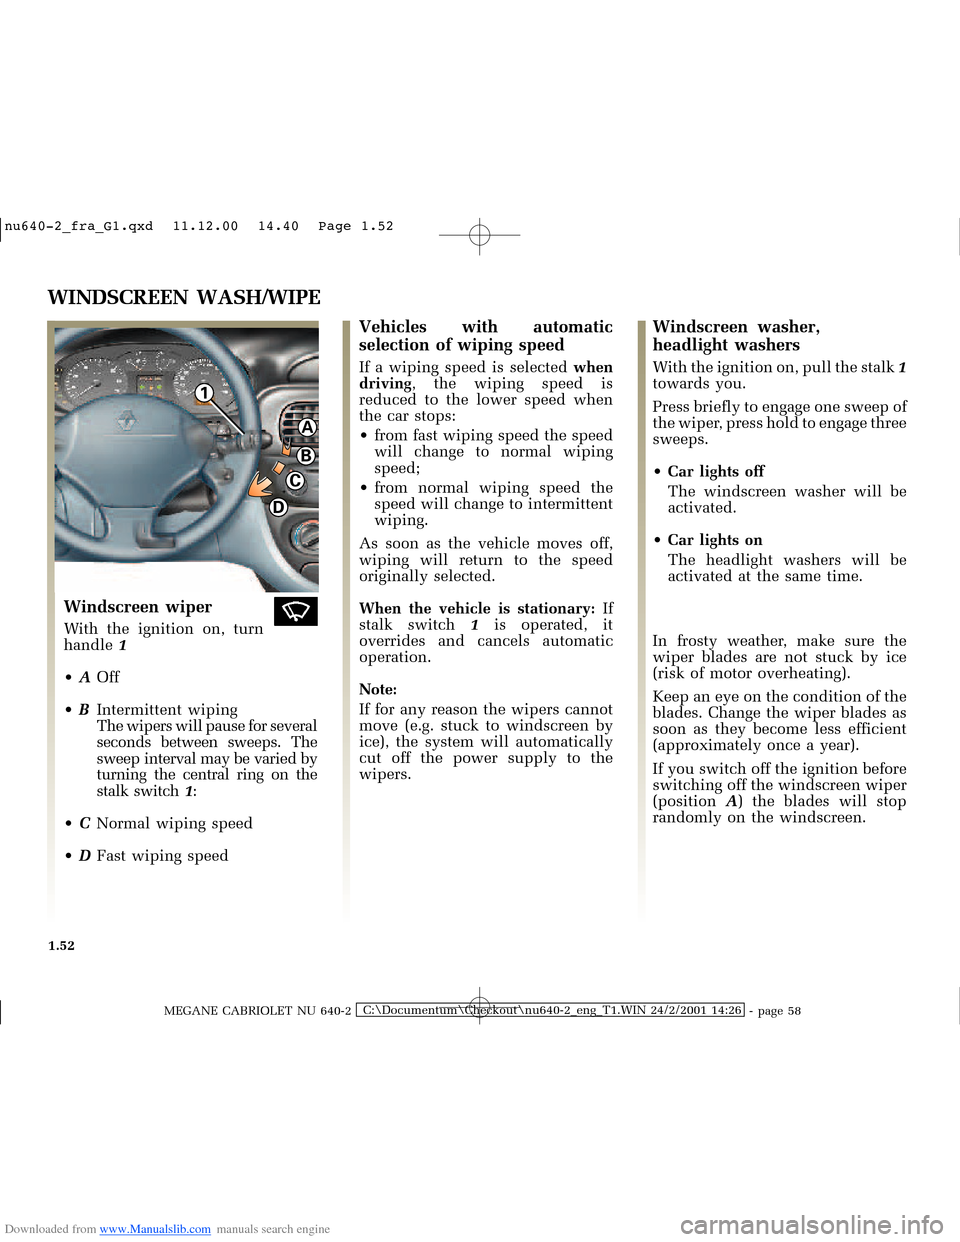 RENAULT MEGANE 2000 X64 / 1.G Workshop Manual Downloaded from www.Manualslib.com manuals search engine A
B
C
D
1
�Q�X������B�I�U�D�B�*���T�[�G� � ��������� � ������ � �3�D�J�H� ����
MEGANE CABRIOLET NU 640-2C:\Docum